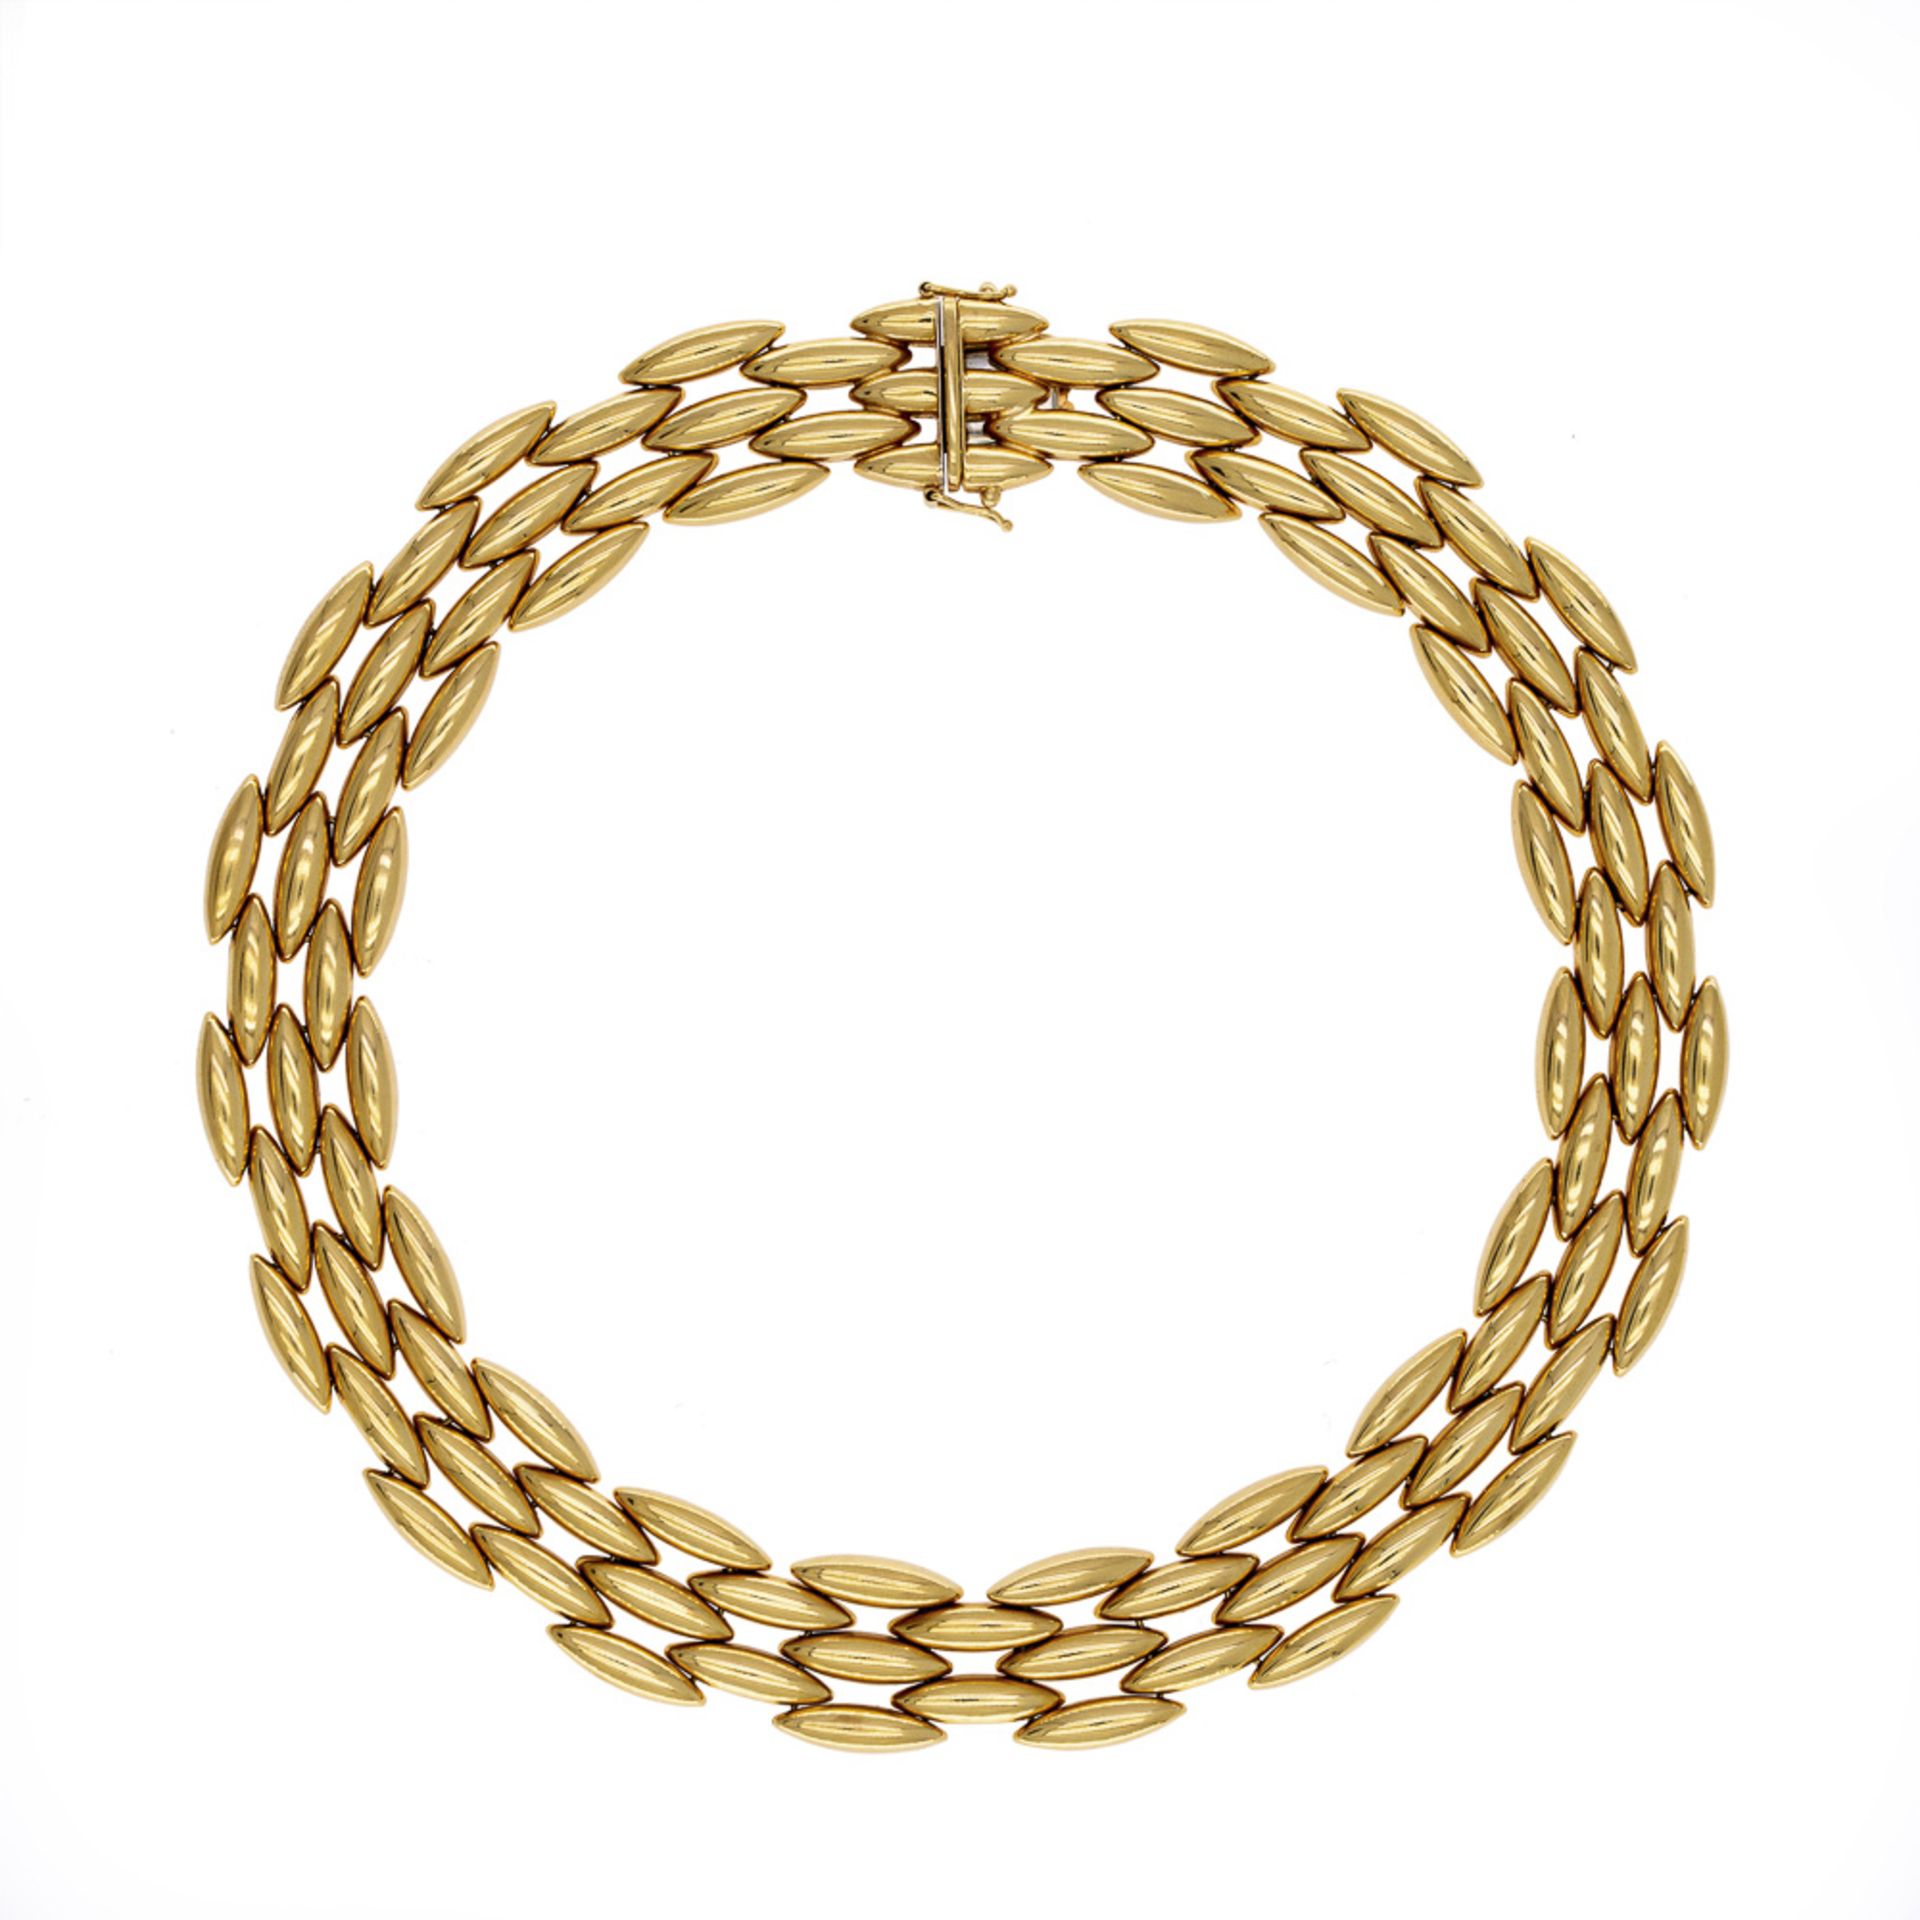 Cartier Gentiane collection necklace